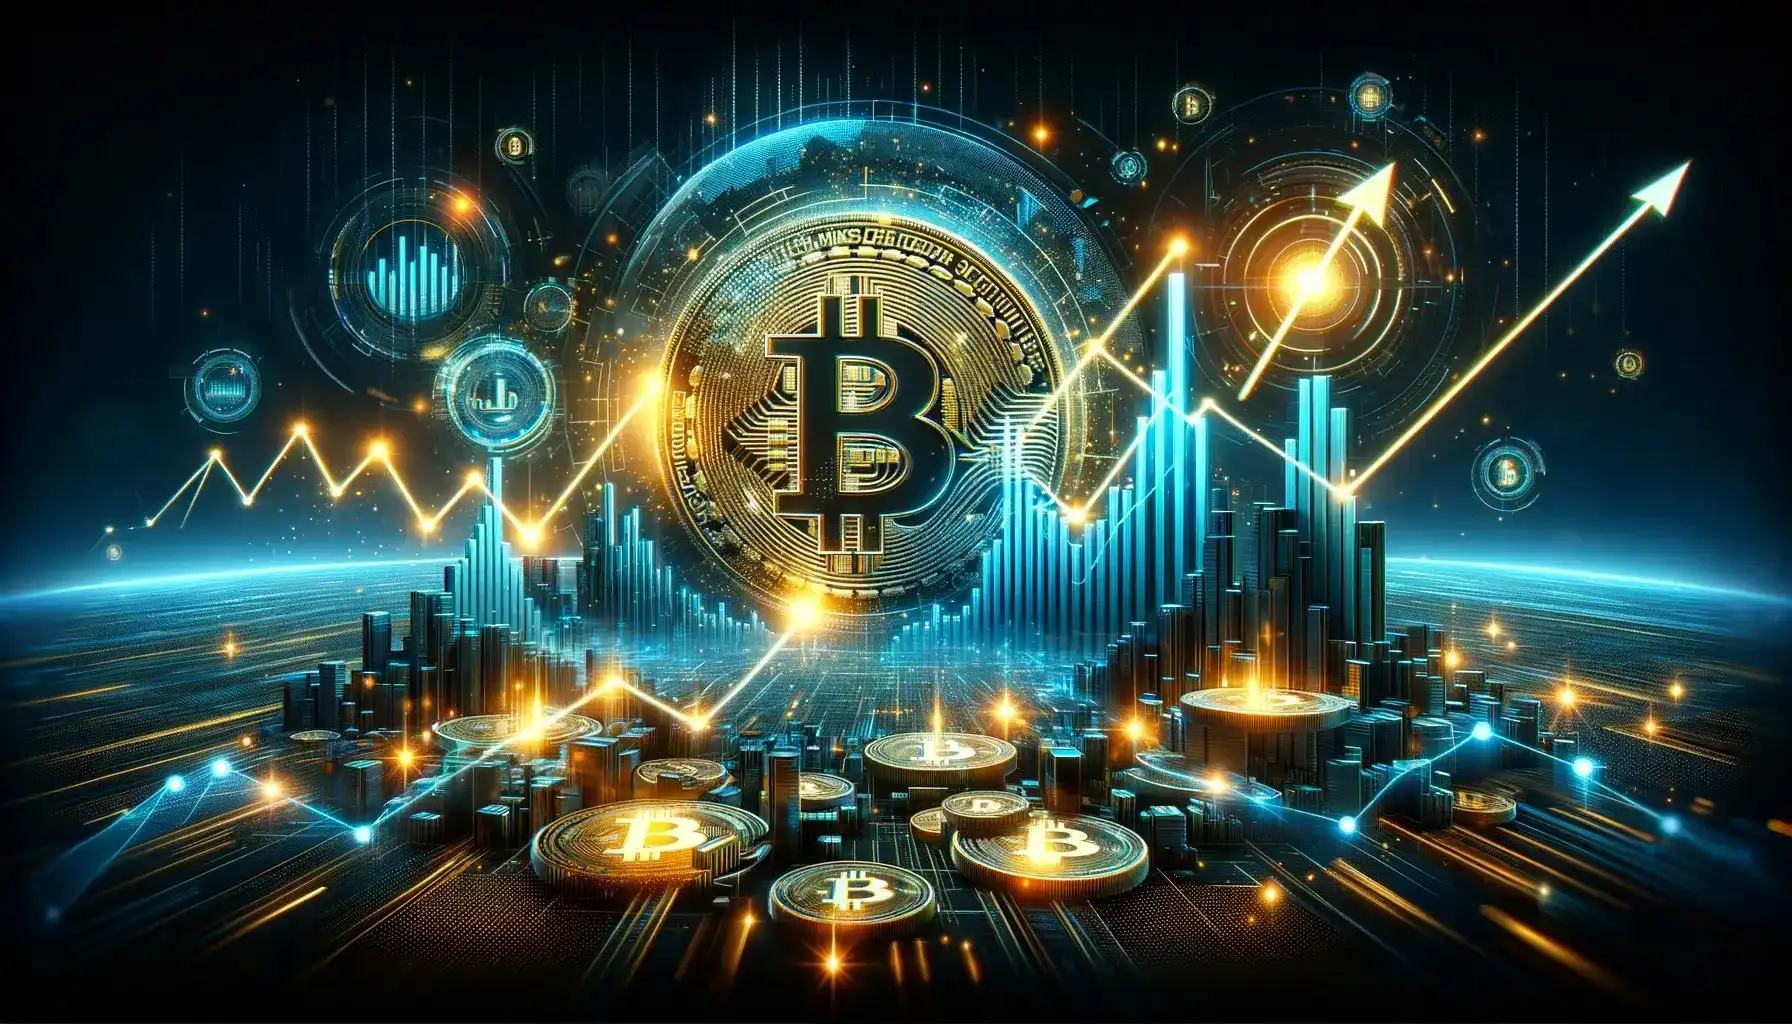 Bitcoin Price Surges Near All-Time High: Key Factors Behind the Rally